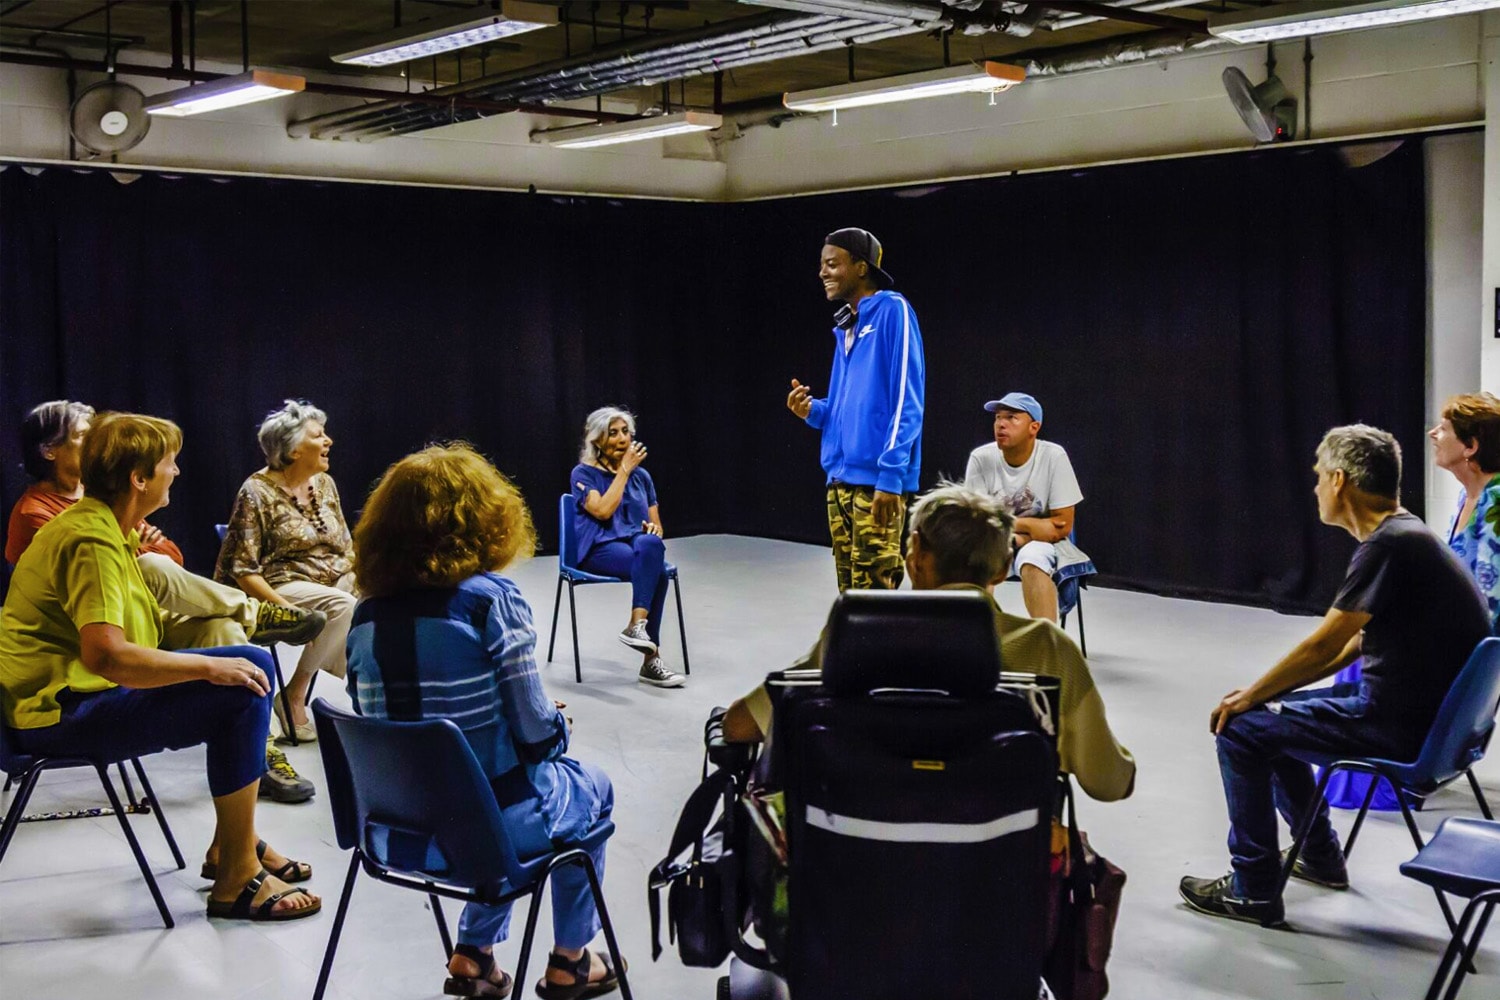 An artsdepot drama workshop in a drama studio. In the centre, a young black man in a blue hoodie is speaking. He is in the middle of a circle of other adults of various ages, all sat down.